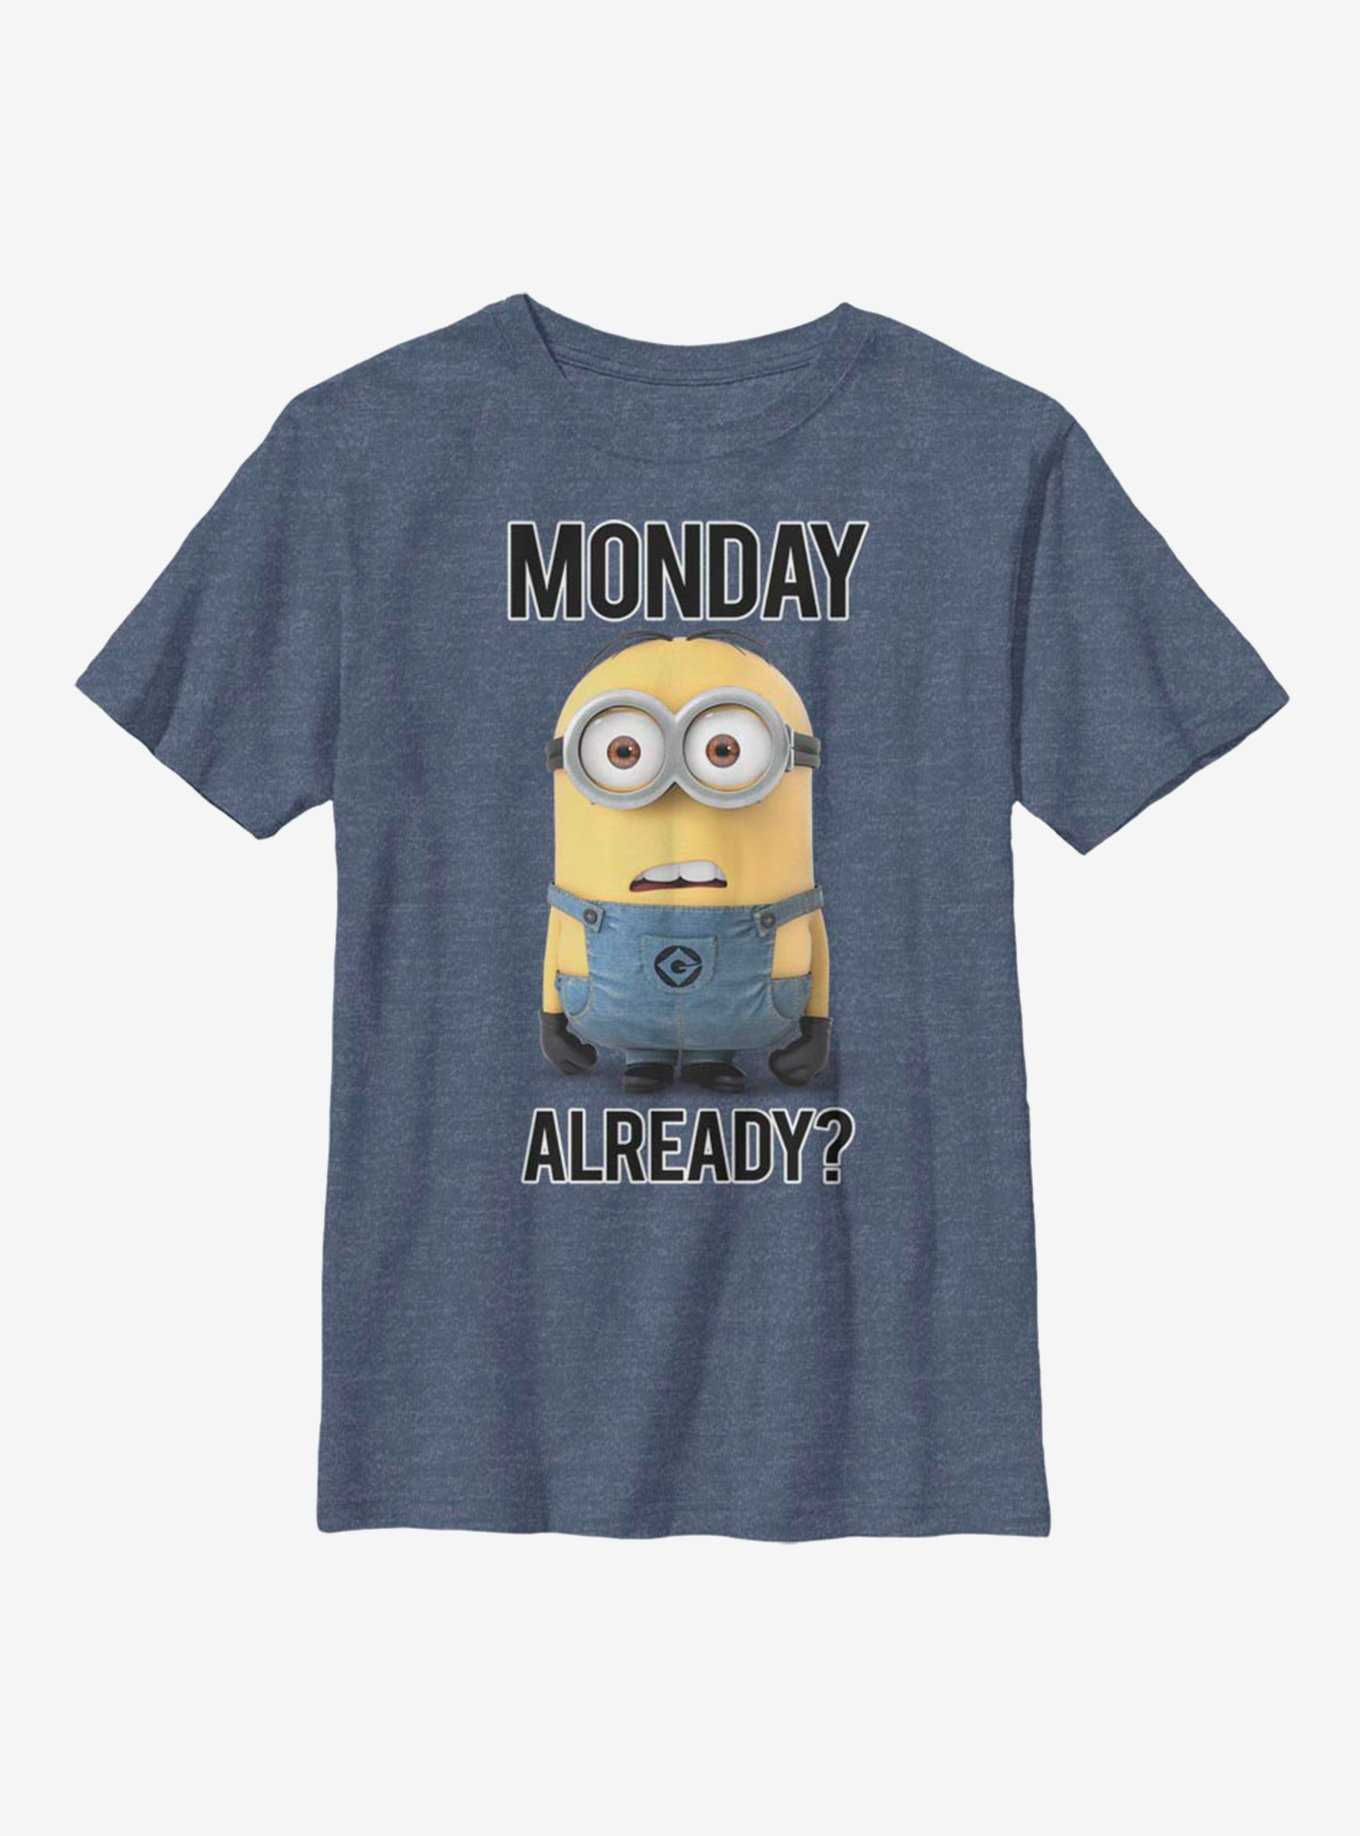 Despicable Me Minions Break Over Youth T-Shirt, , hi-res